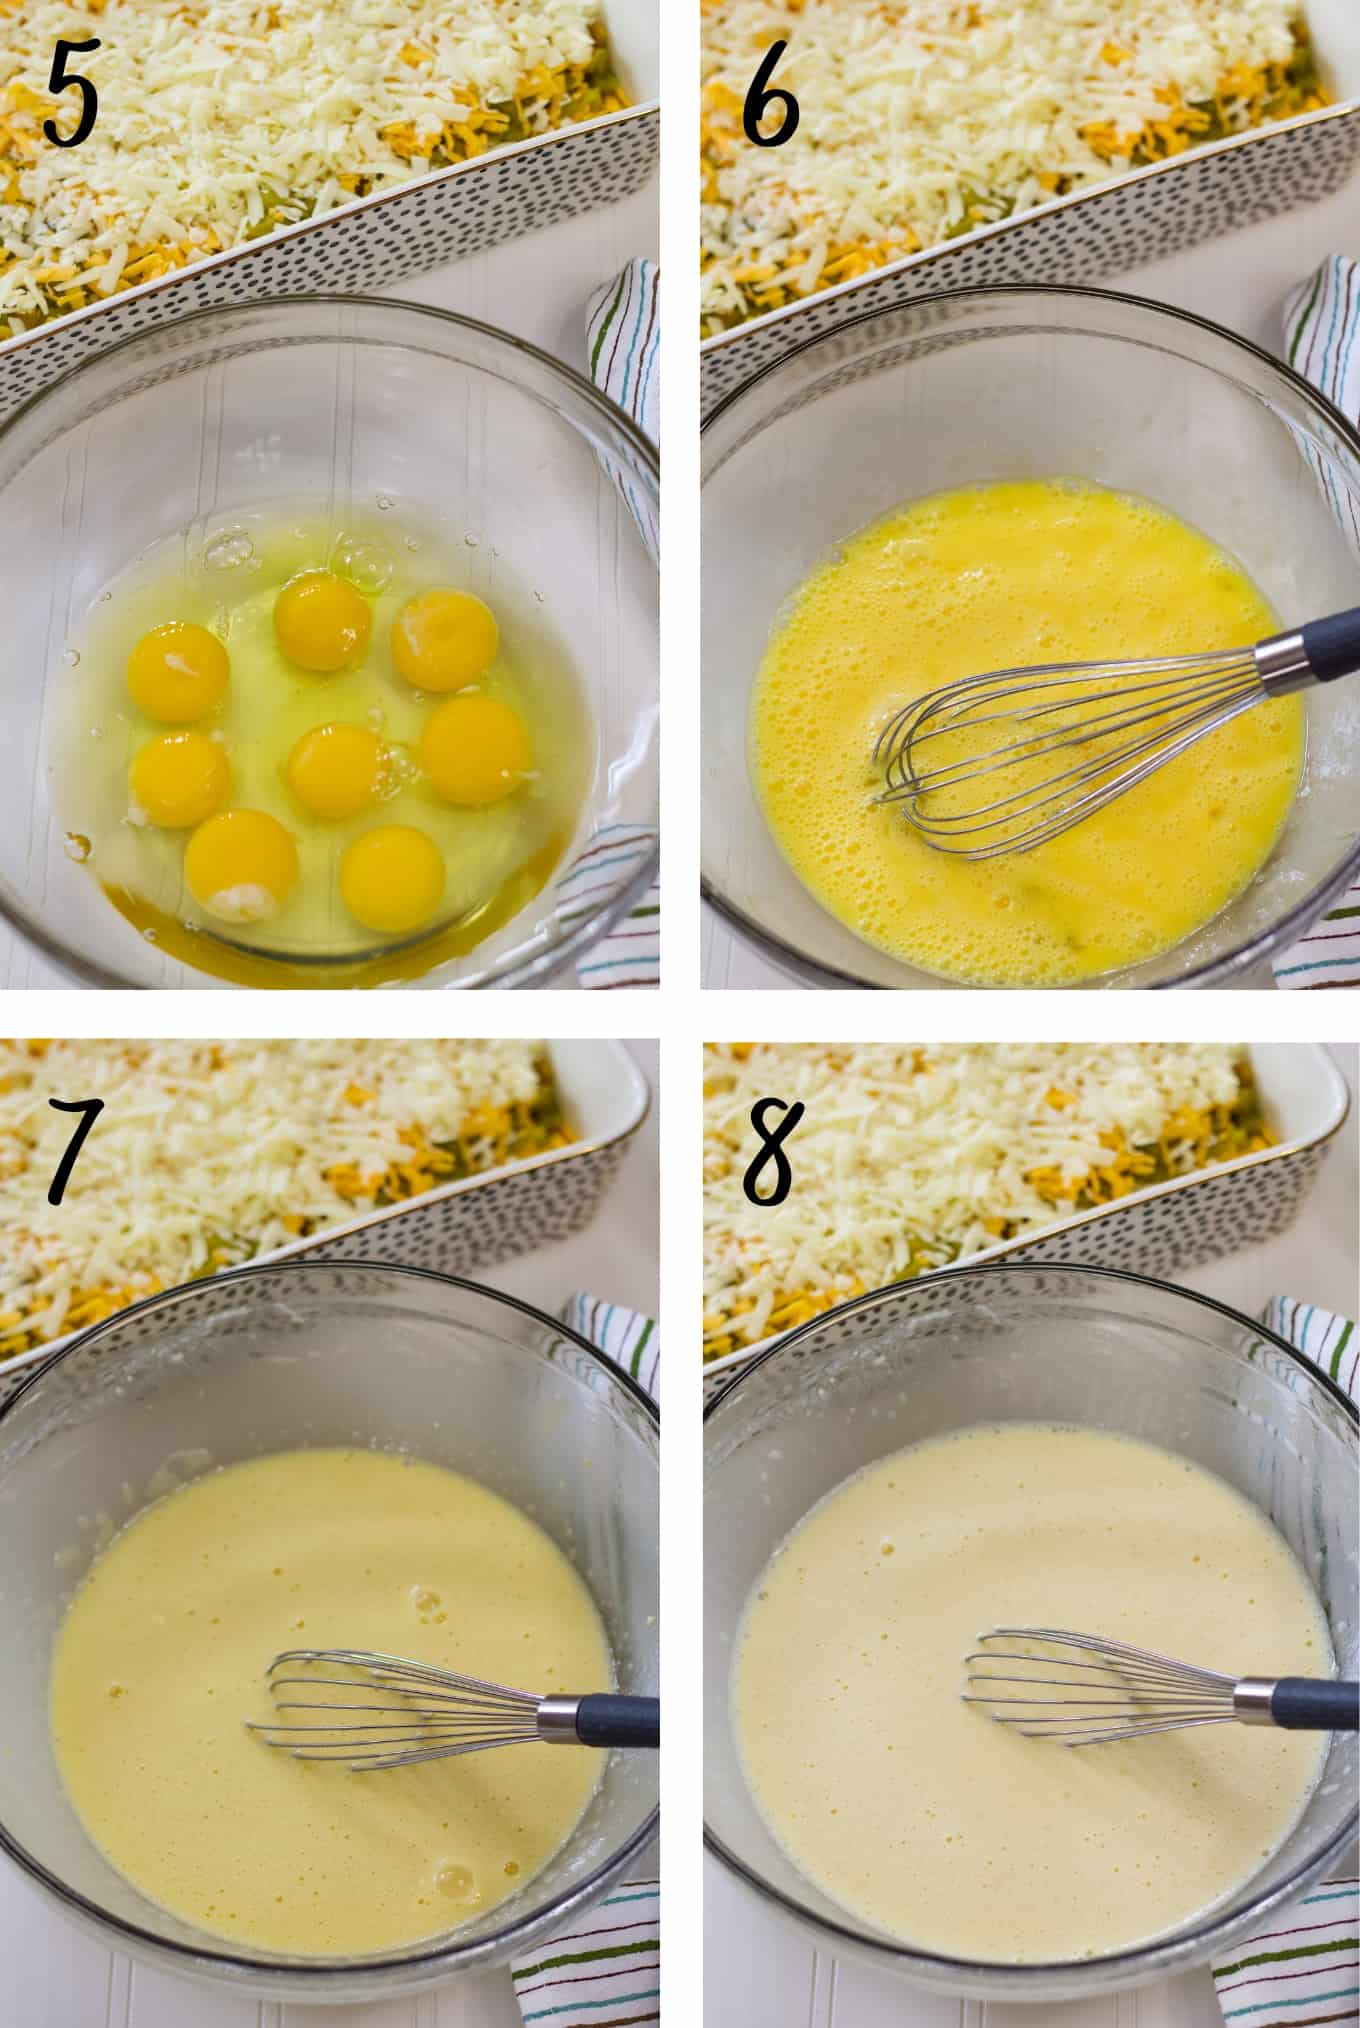 A collage of four images showing the stages of the eggs whipped with the milk and flour.